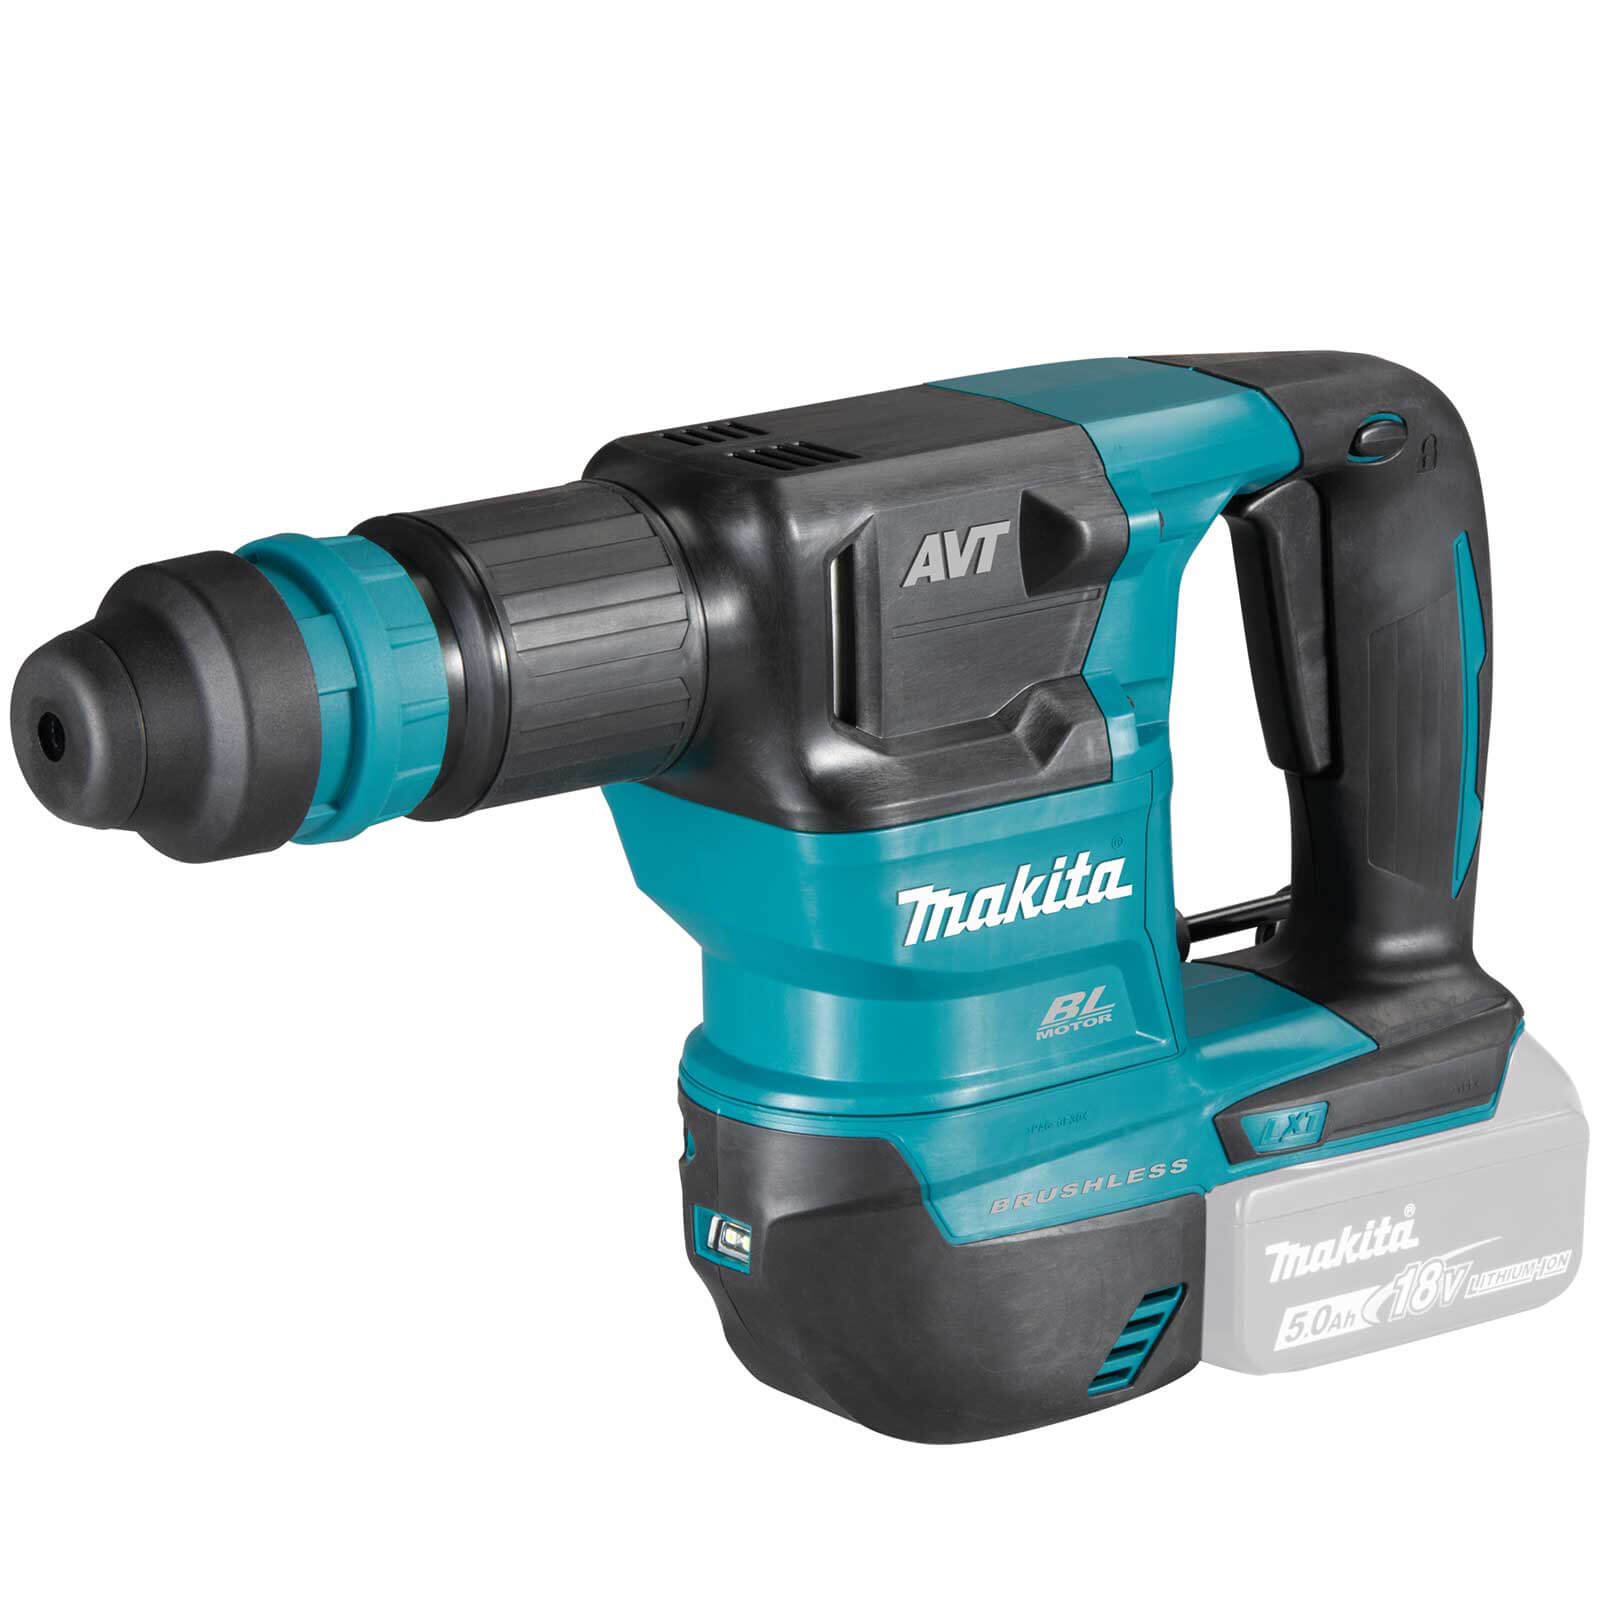 Image of Makita DHK180 18v LXT Cordless Brushless Power Scraper No Batteries No Charger No Case